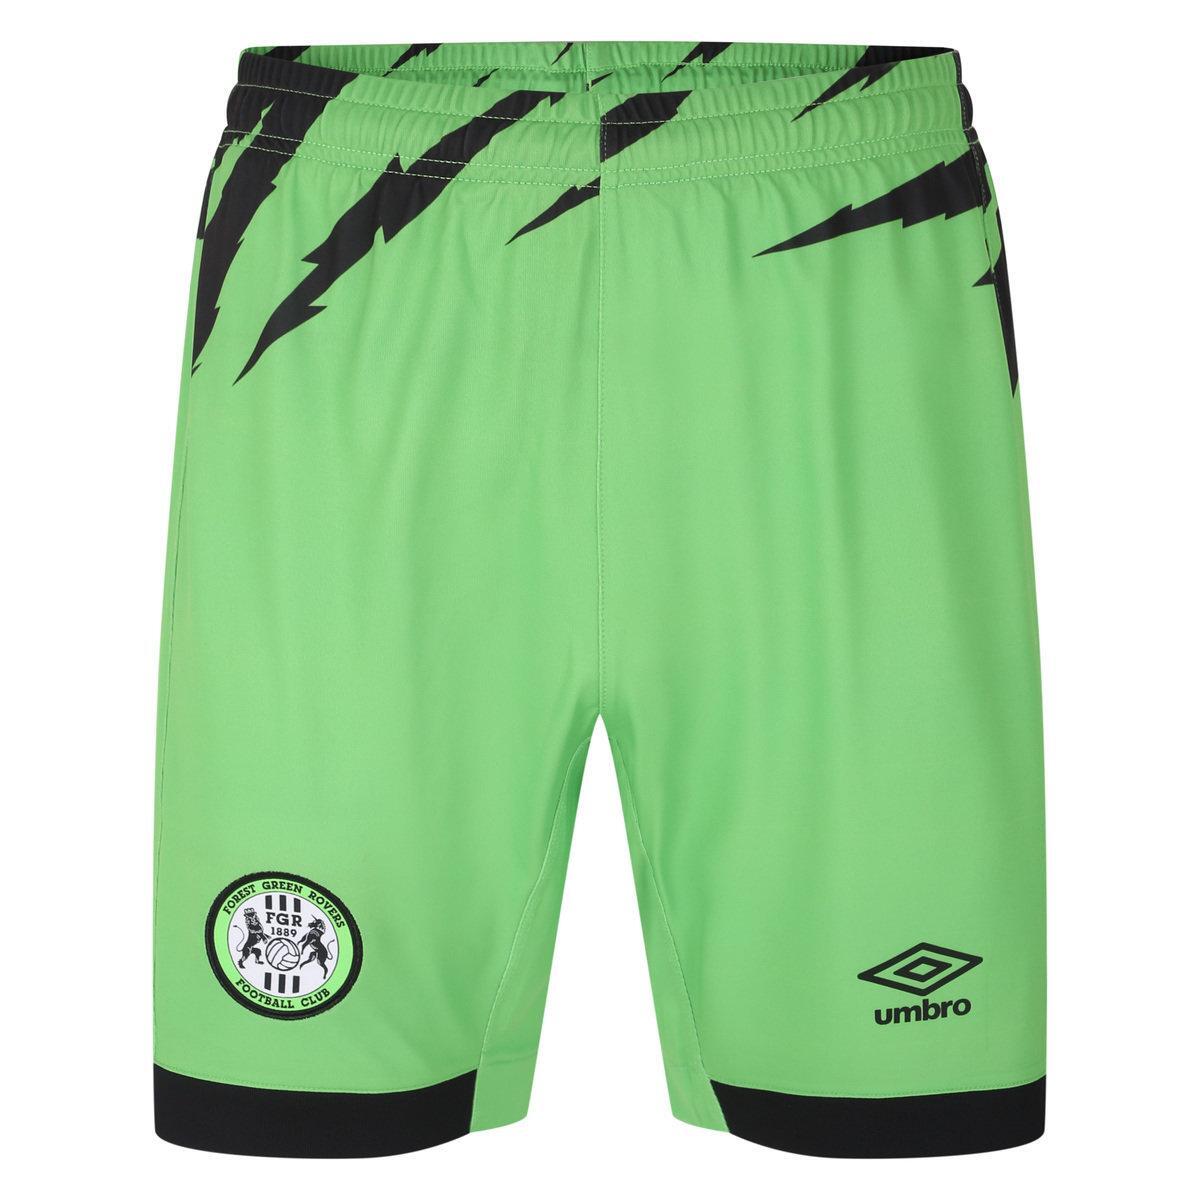 UMBRO Mens 23/24 Forest Green Rovers FC Home Shorts (Green/Black)